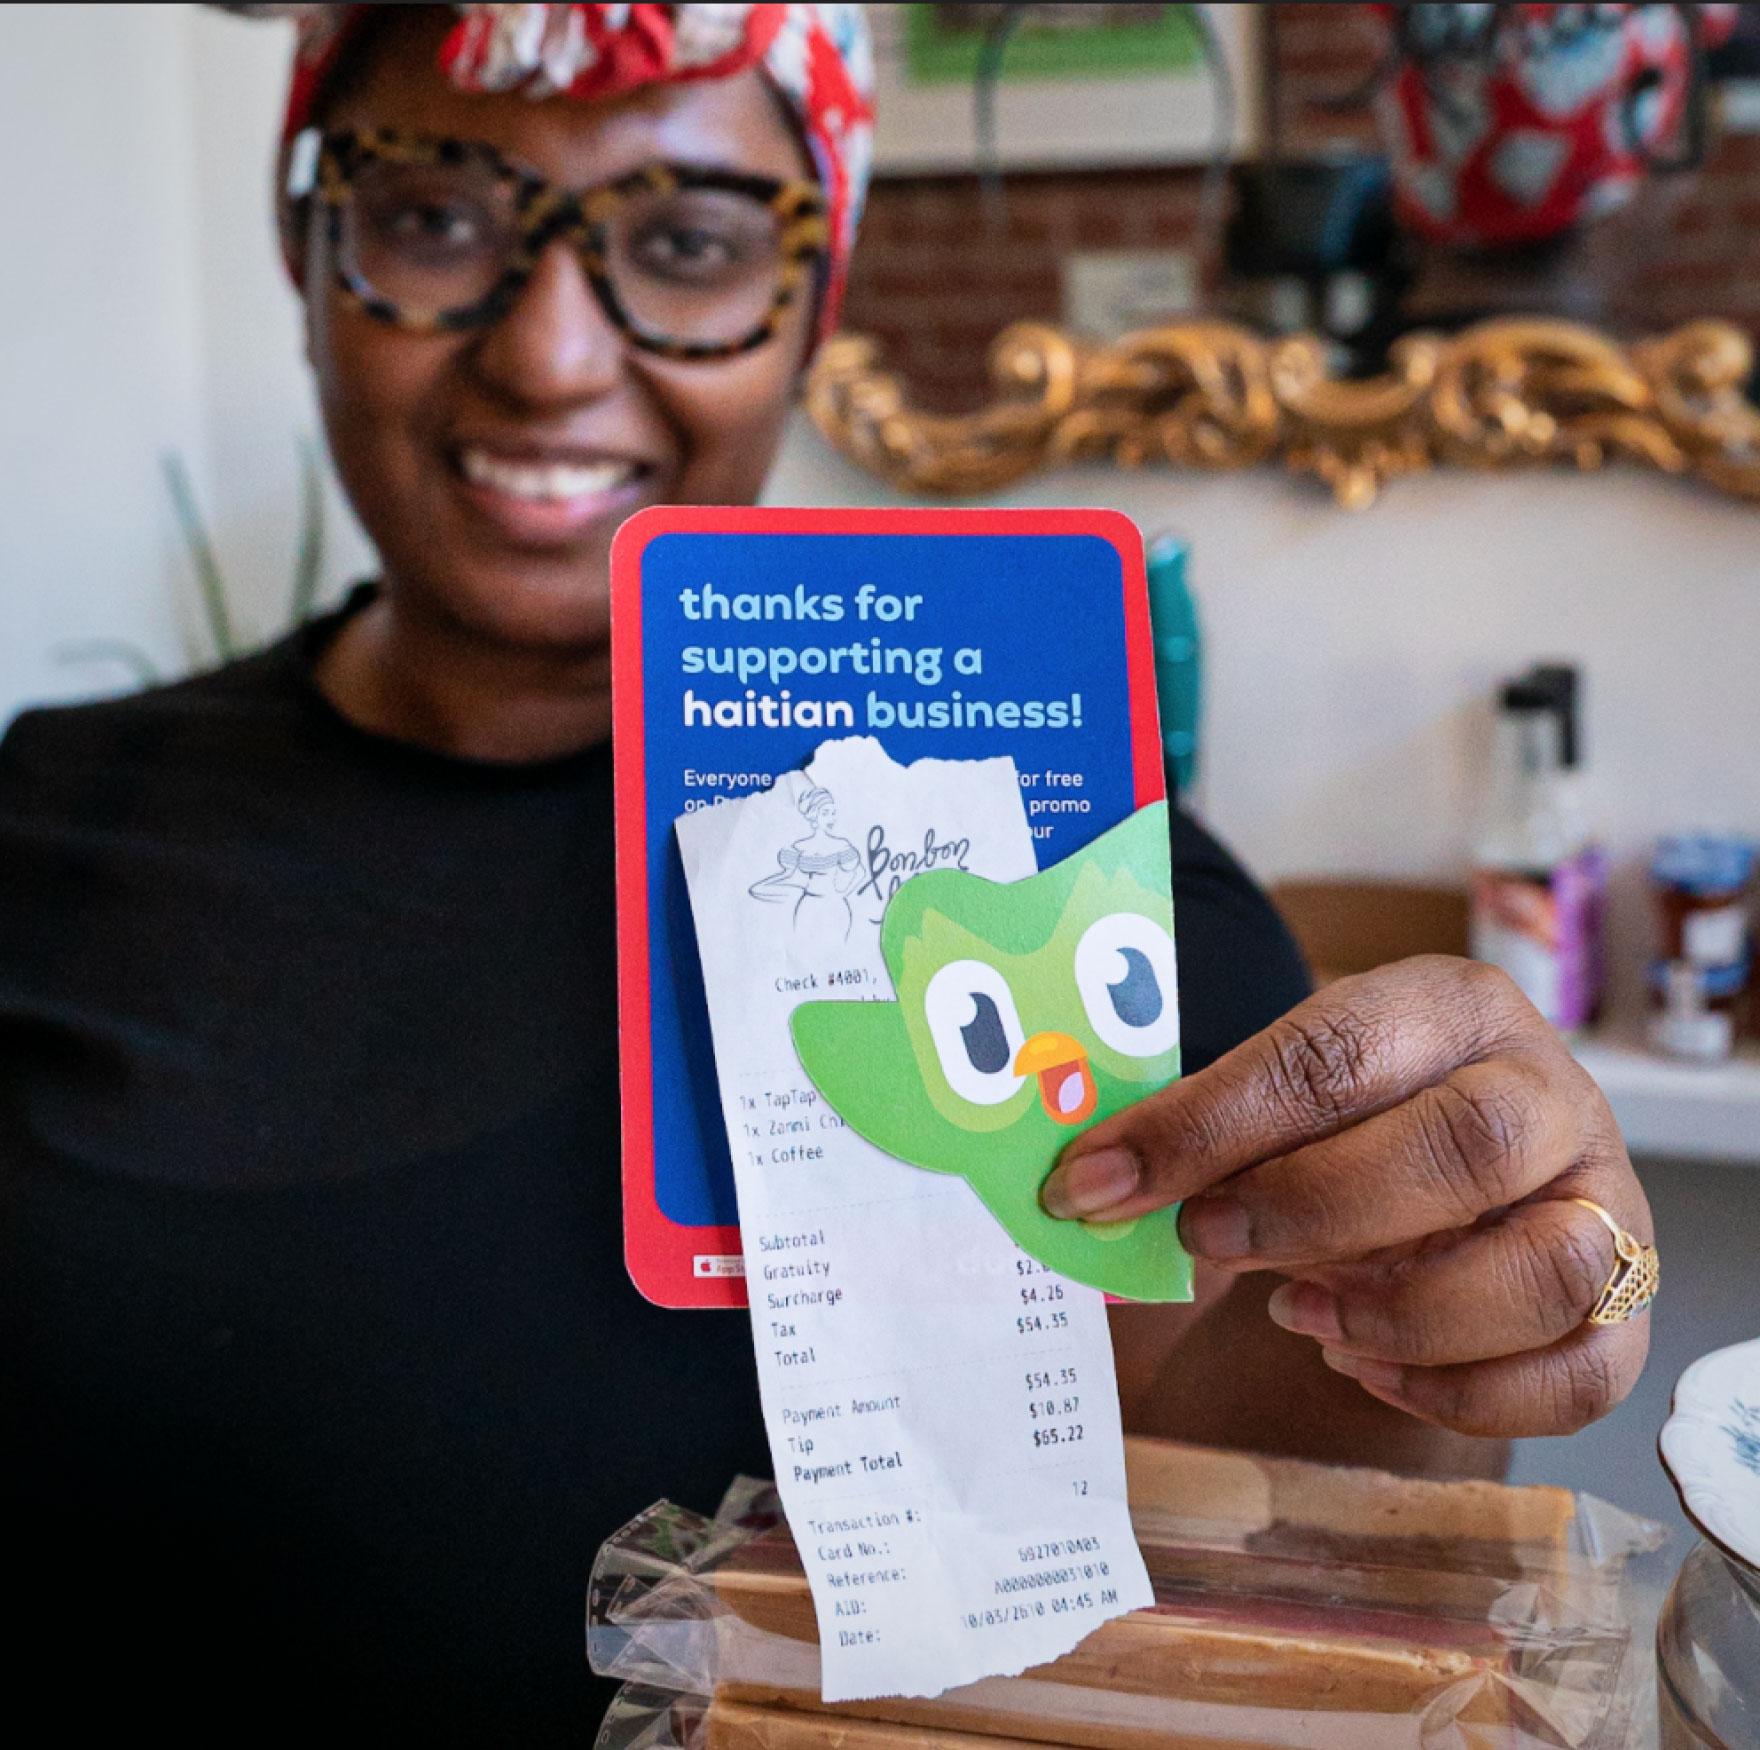 Duolingo partnered with Haitian-run businesses across the county, giving away a free month of the app’s premium subscription service when customers patronize and practice Haitian Creole participating businesses.